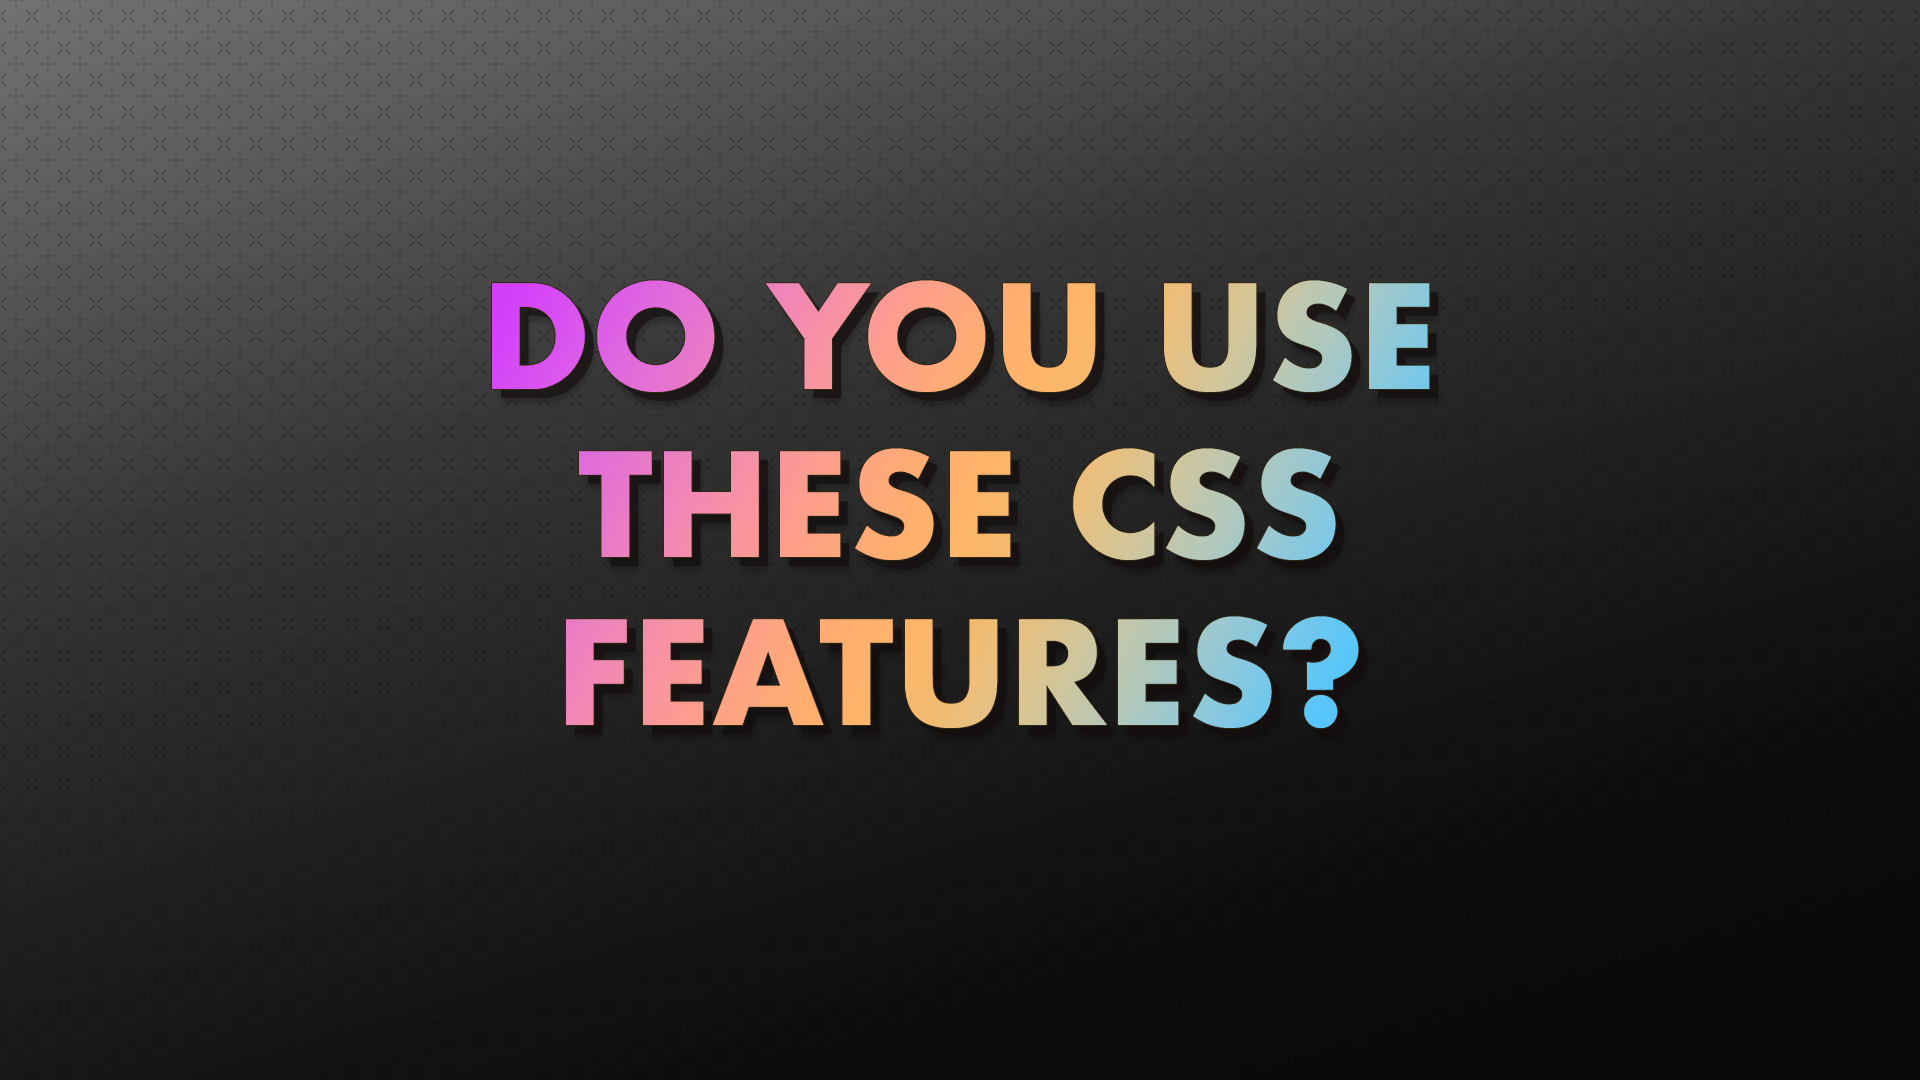 Do you use these css features?